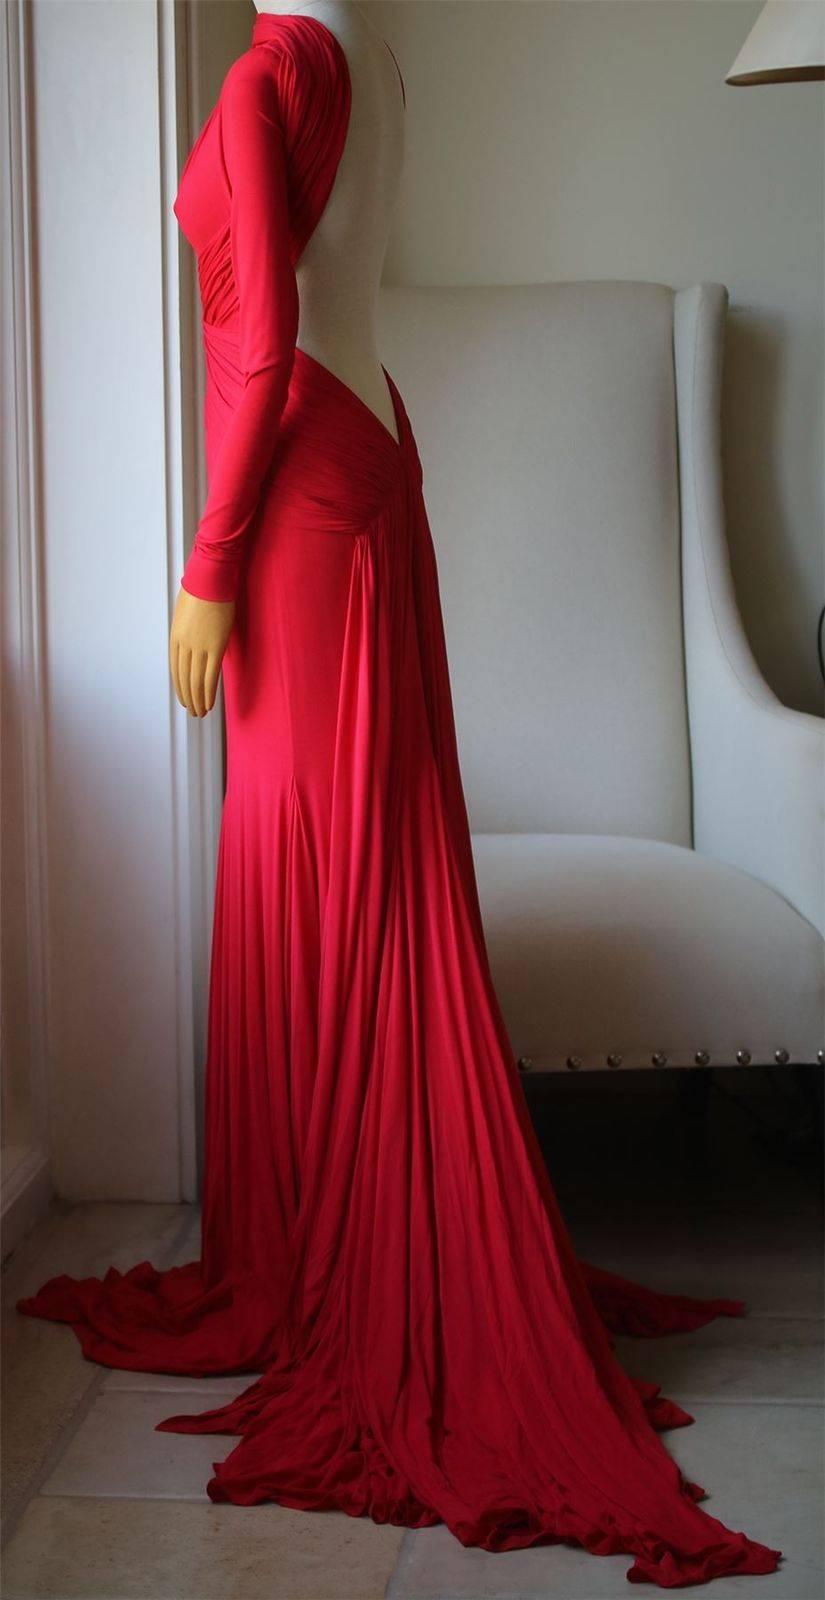 Guy Laroche by Herve L. Leroux red long-sleeved backless gown. The simplicity of Guy Laroche's gown is what sets it apart from your average evening gown. Hilary Swank thought so too when she wore the same dress in navy to receive her Oscar in 2005.